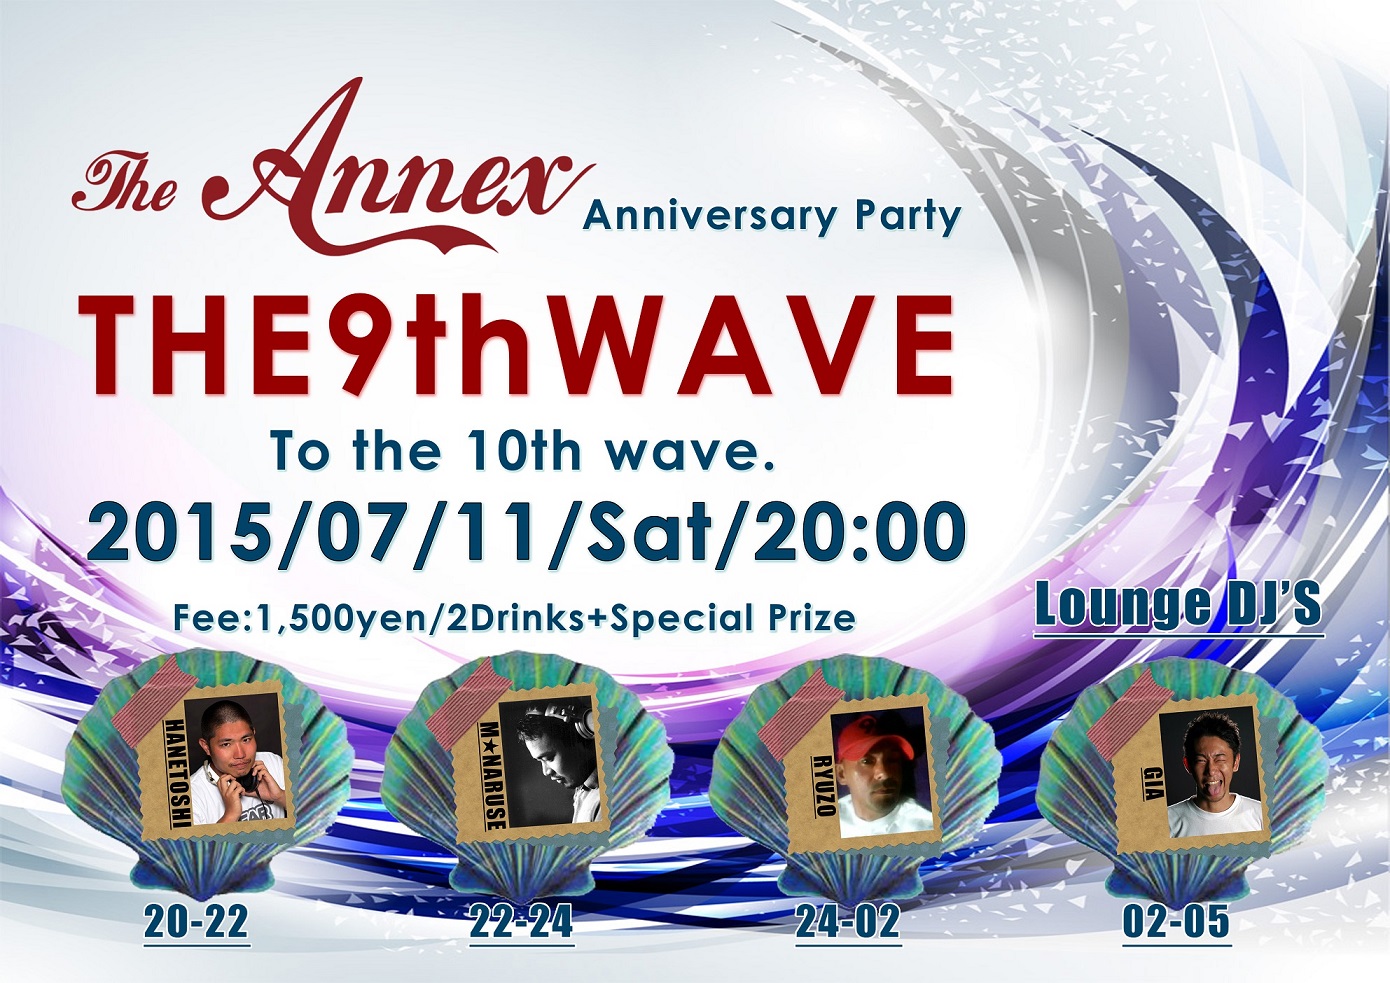 THE ANNEX 9th WAVE ( Anniversary Party )